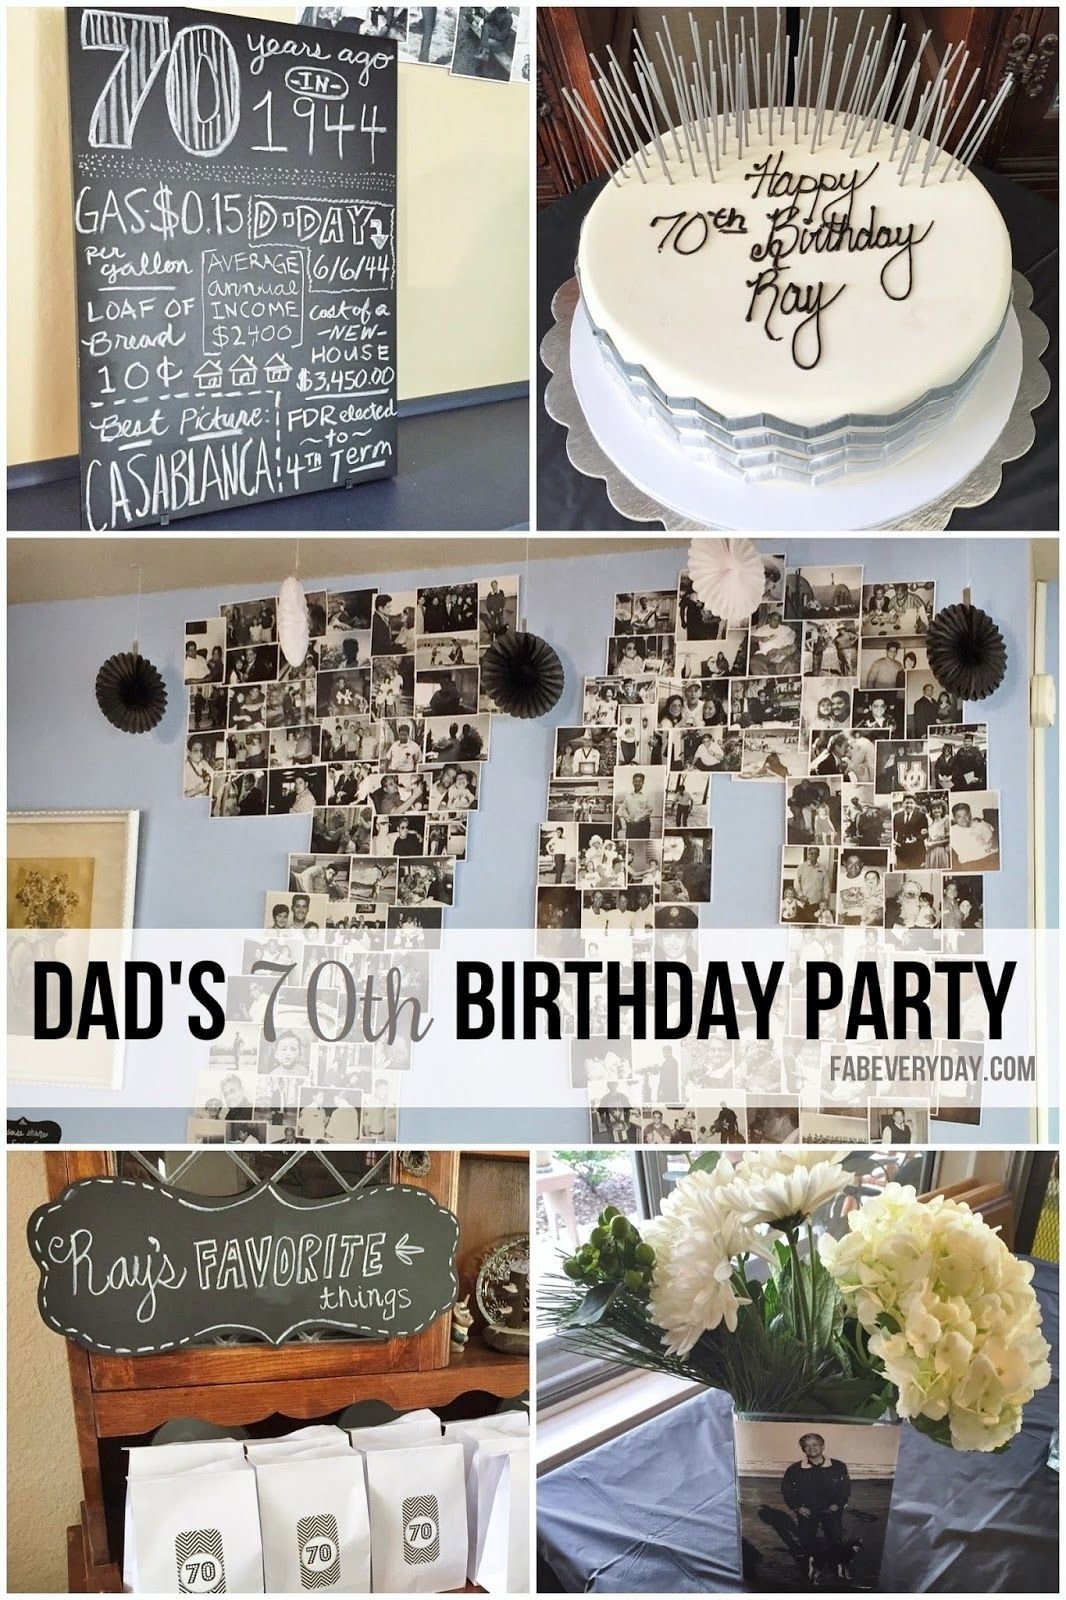 10 Best 80Th Birthday Party Ideas For Dad milestone birthday planning my dads 70th birthday party 70 5 2022